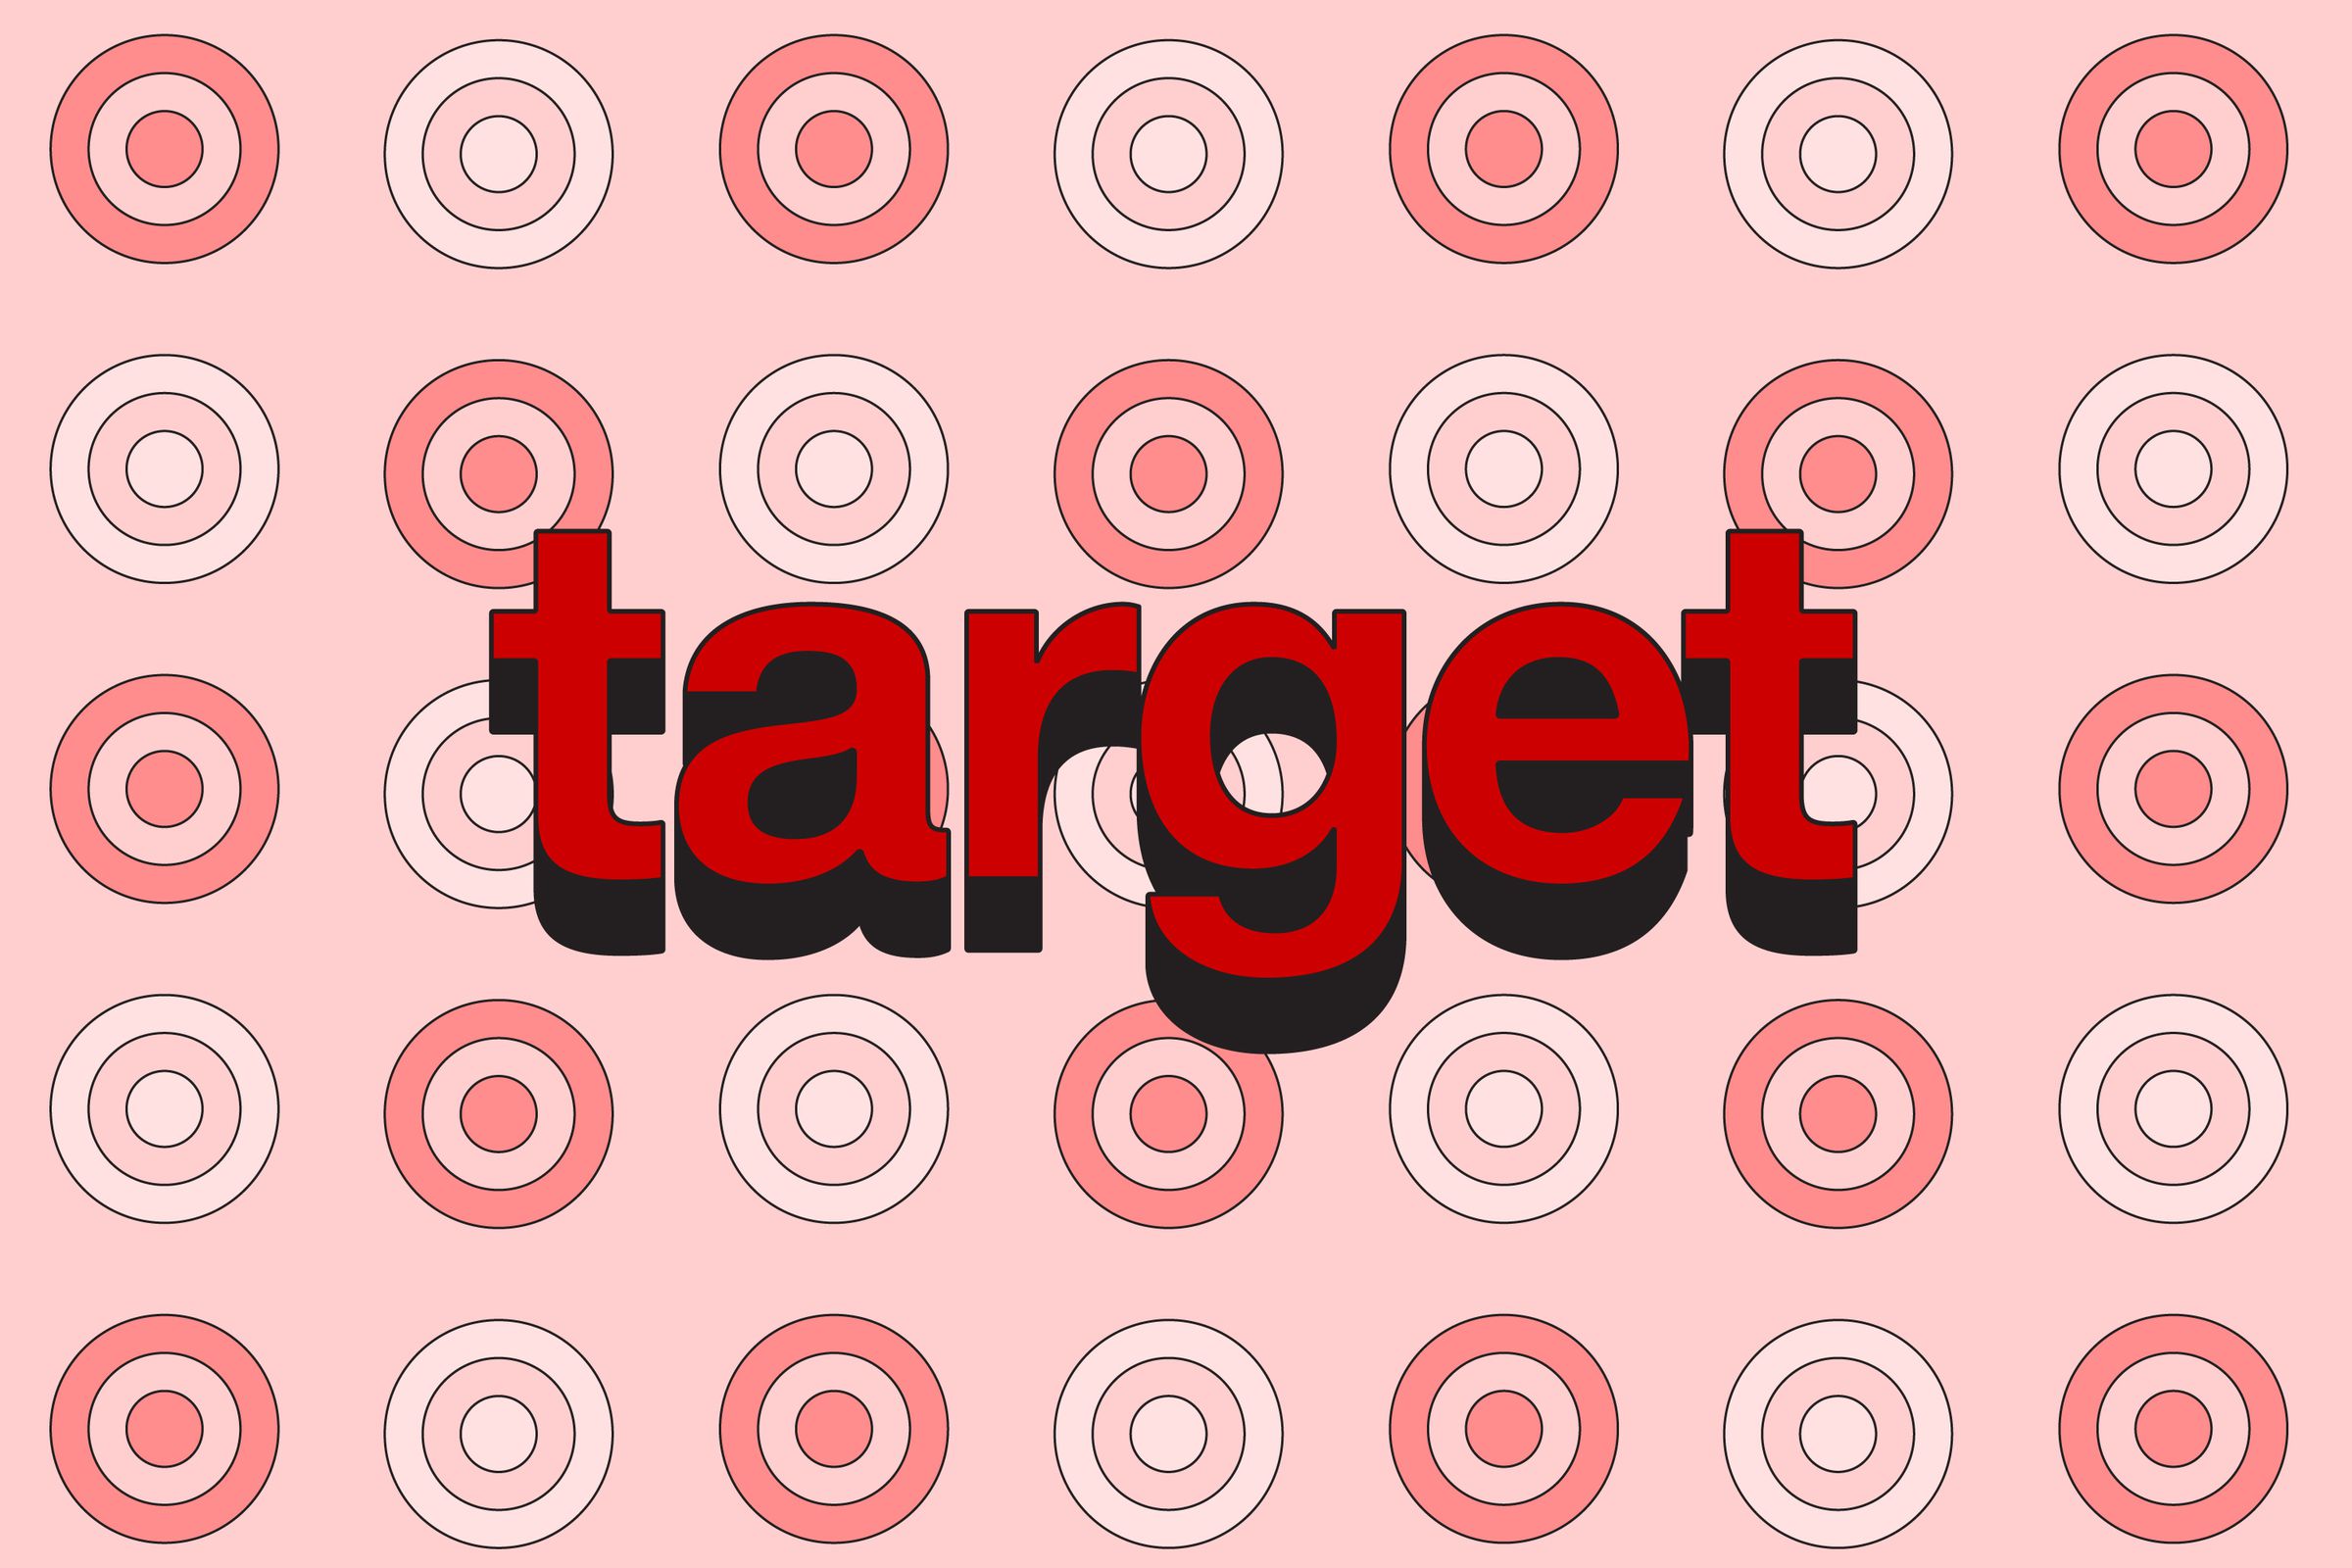 The target logo on a repeating pink and white bullseye illustration